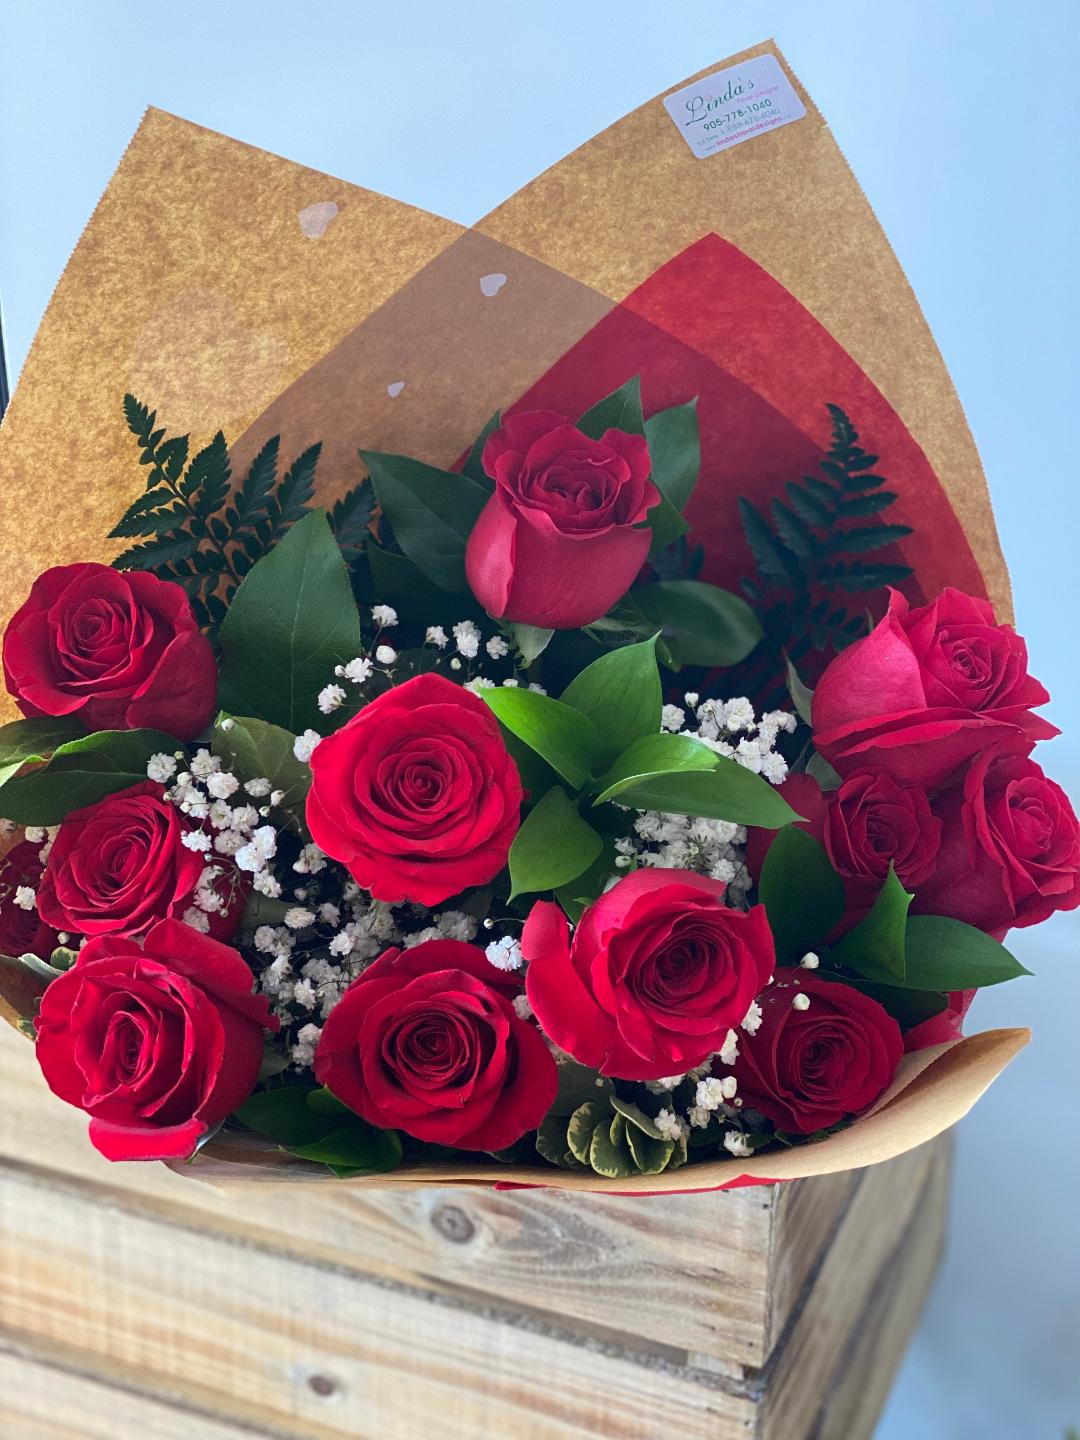 A dozen beautiful red roses hand-tied